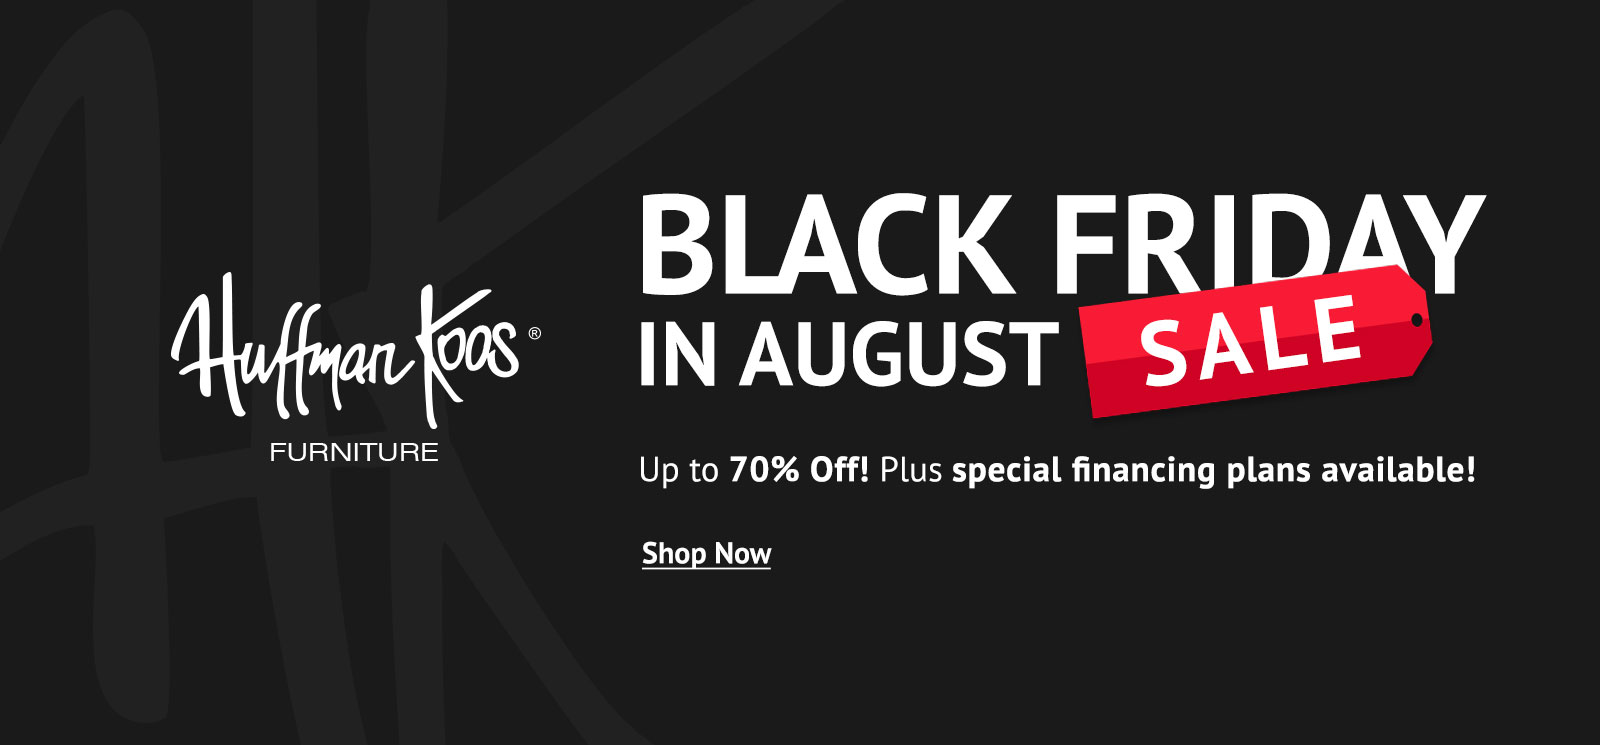 Black Friday in August Sale